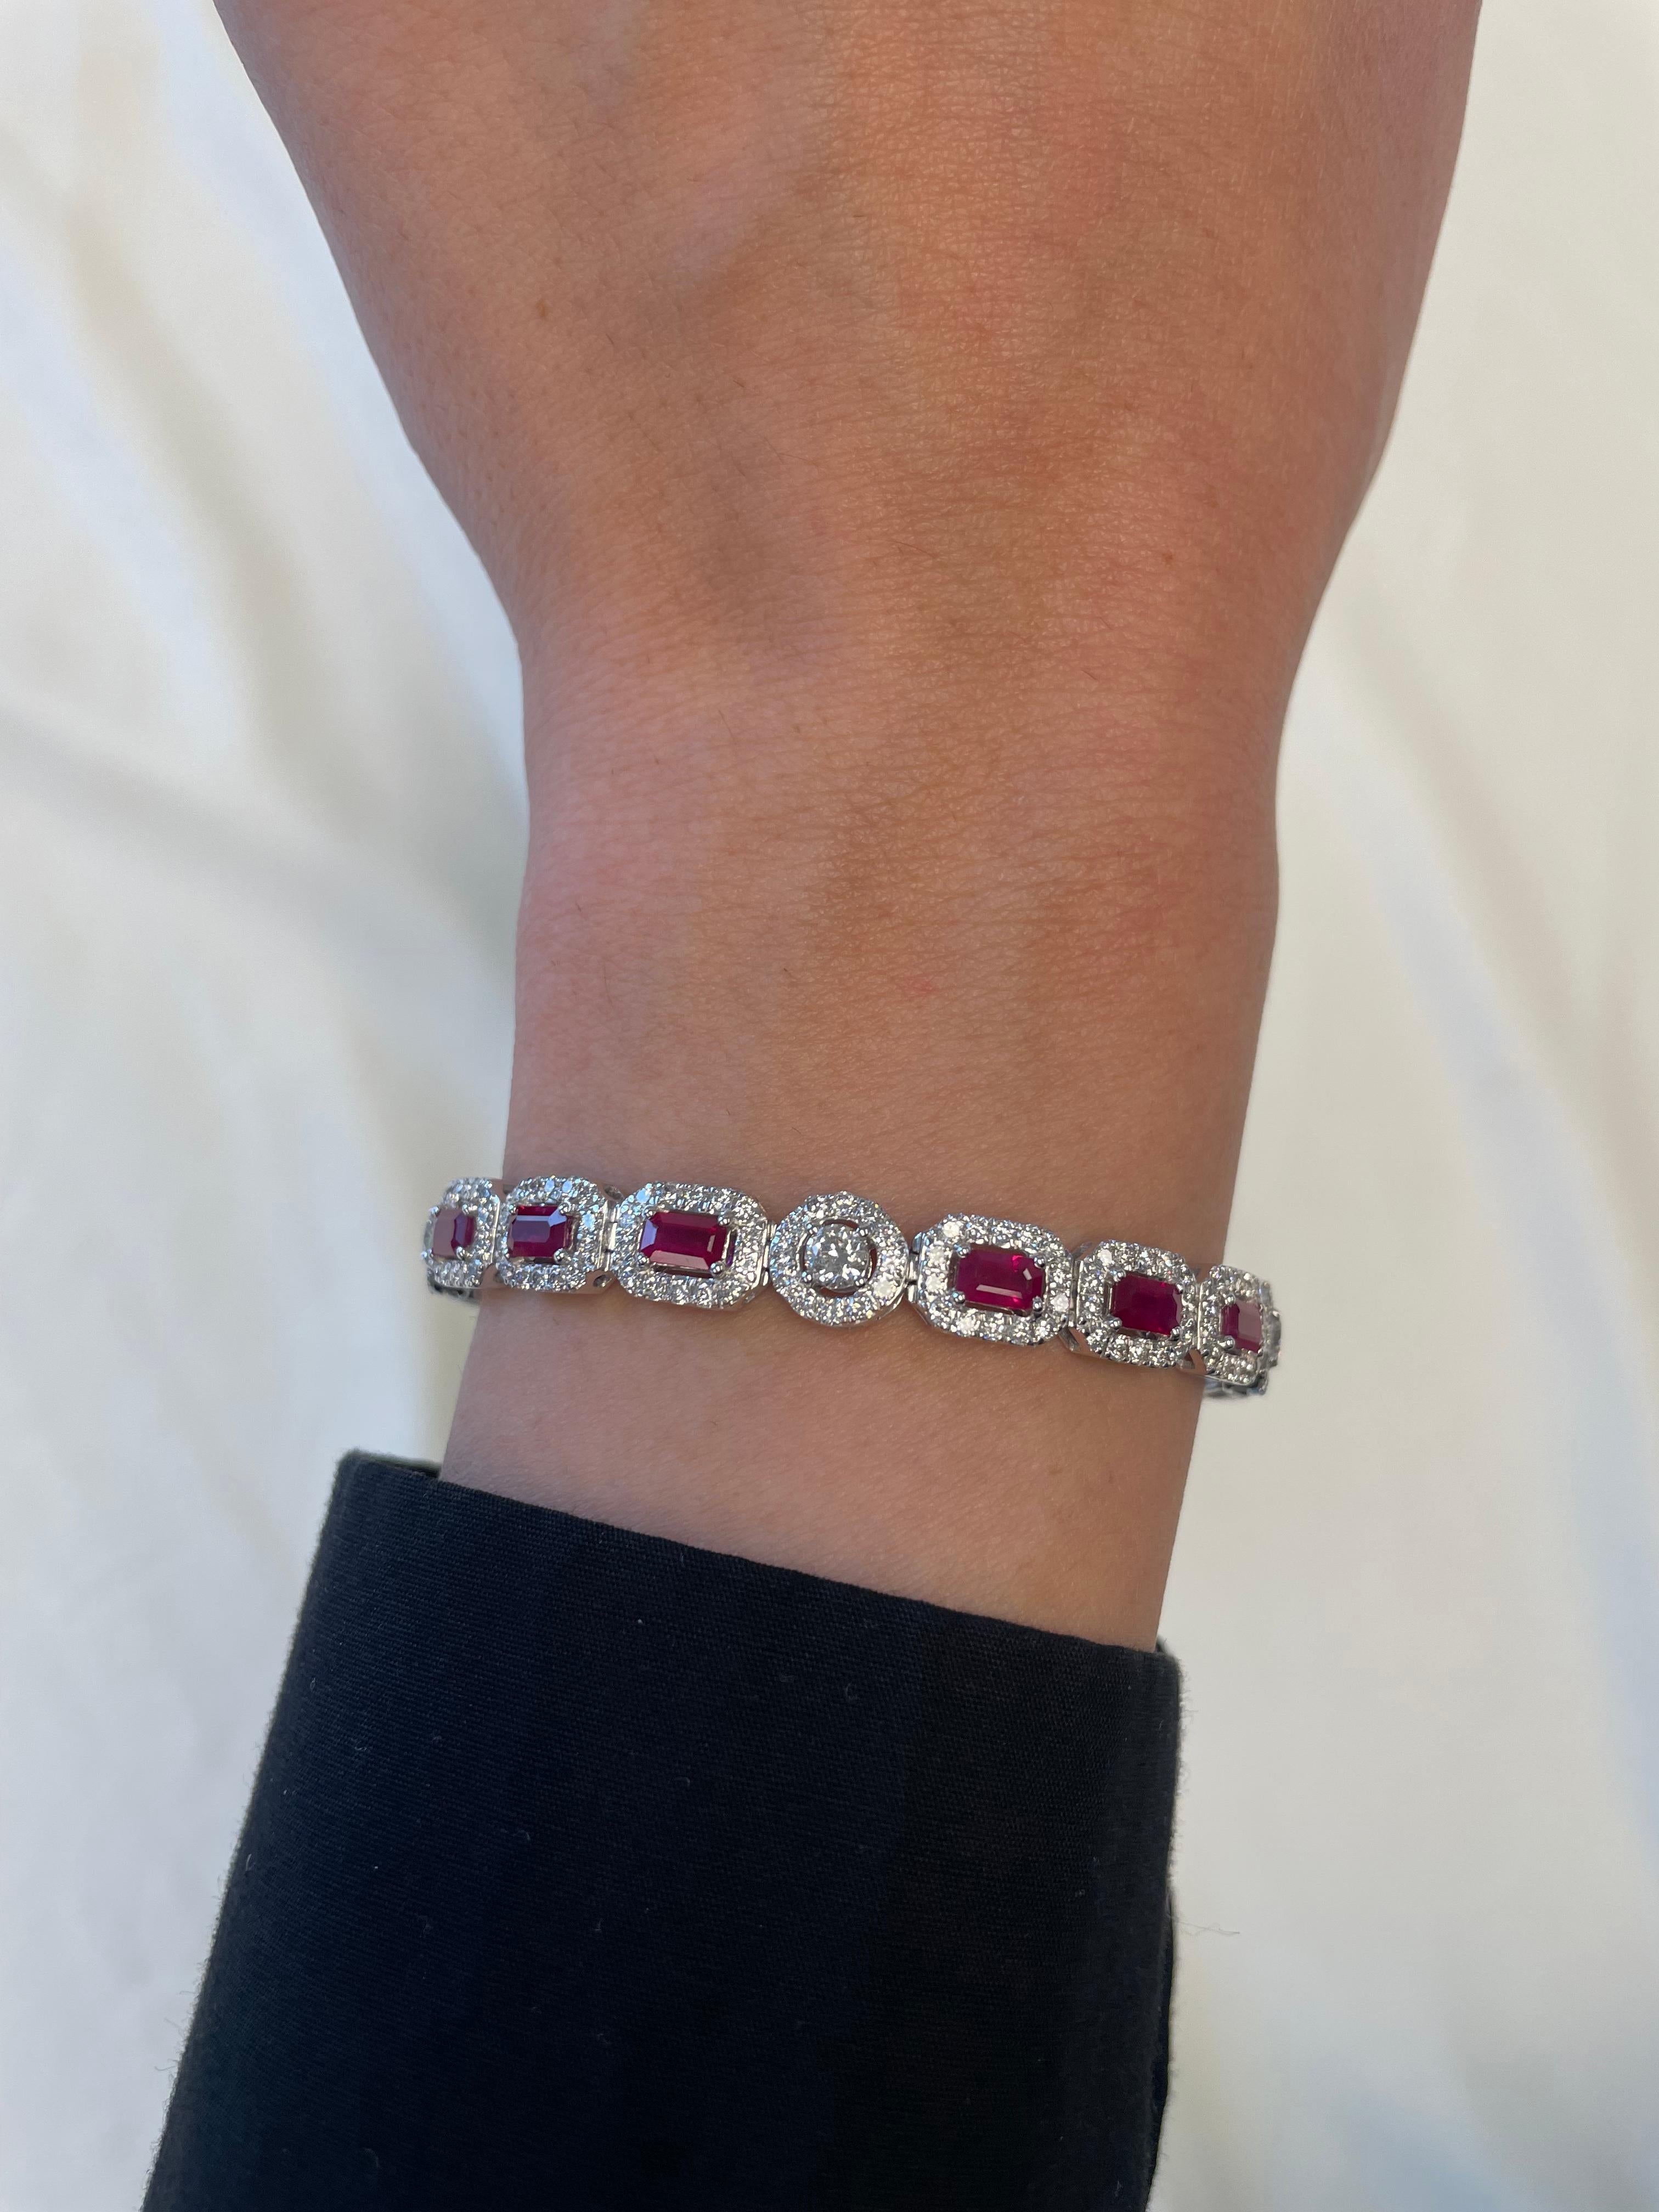 Exquisite and elegant ruby and diamond bracelet.
9.05 carats total gemstone weight.
15 emerald cut rubies, heat, 4.25 carats. Complimented by 4.80 carats of round brilliant diamonds, approximately G/H color and SI clarity. 14k white gold, 20.70